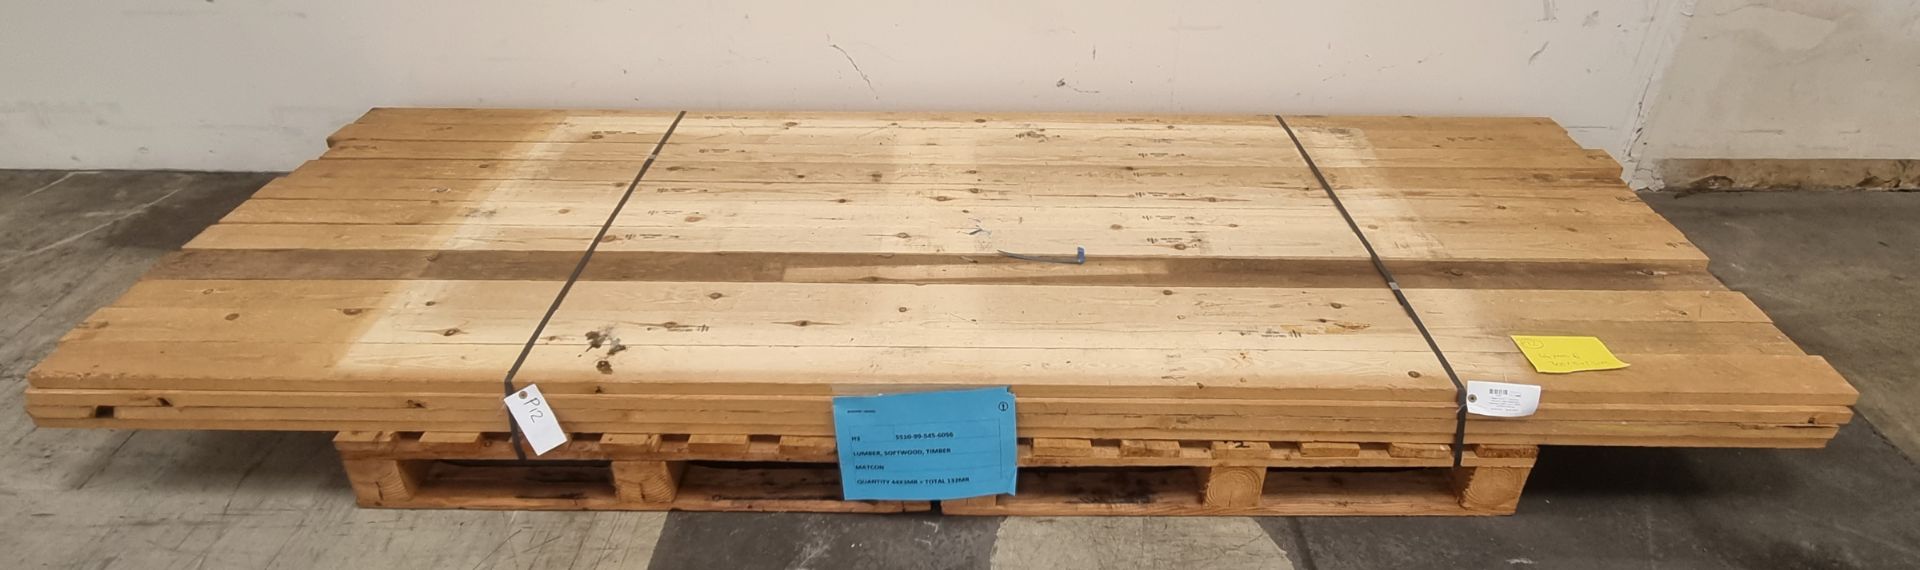 Pallet of 4"x1" softwood various lengths & Pallet of 4"x1" softwood 44pcs